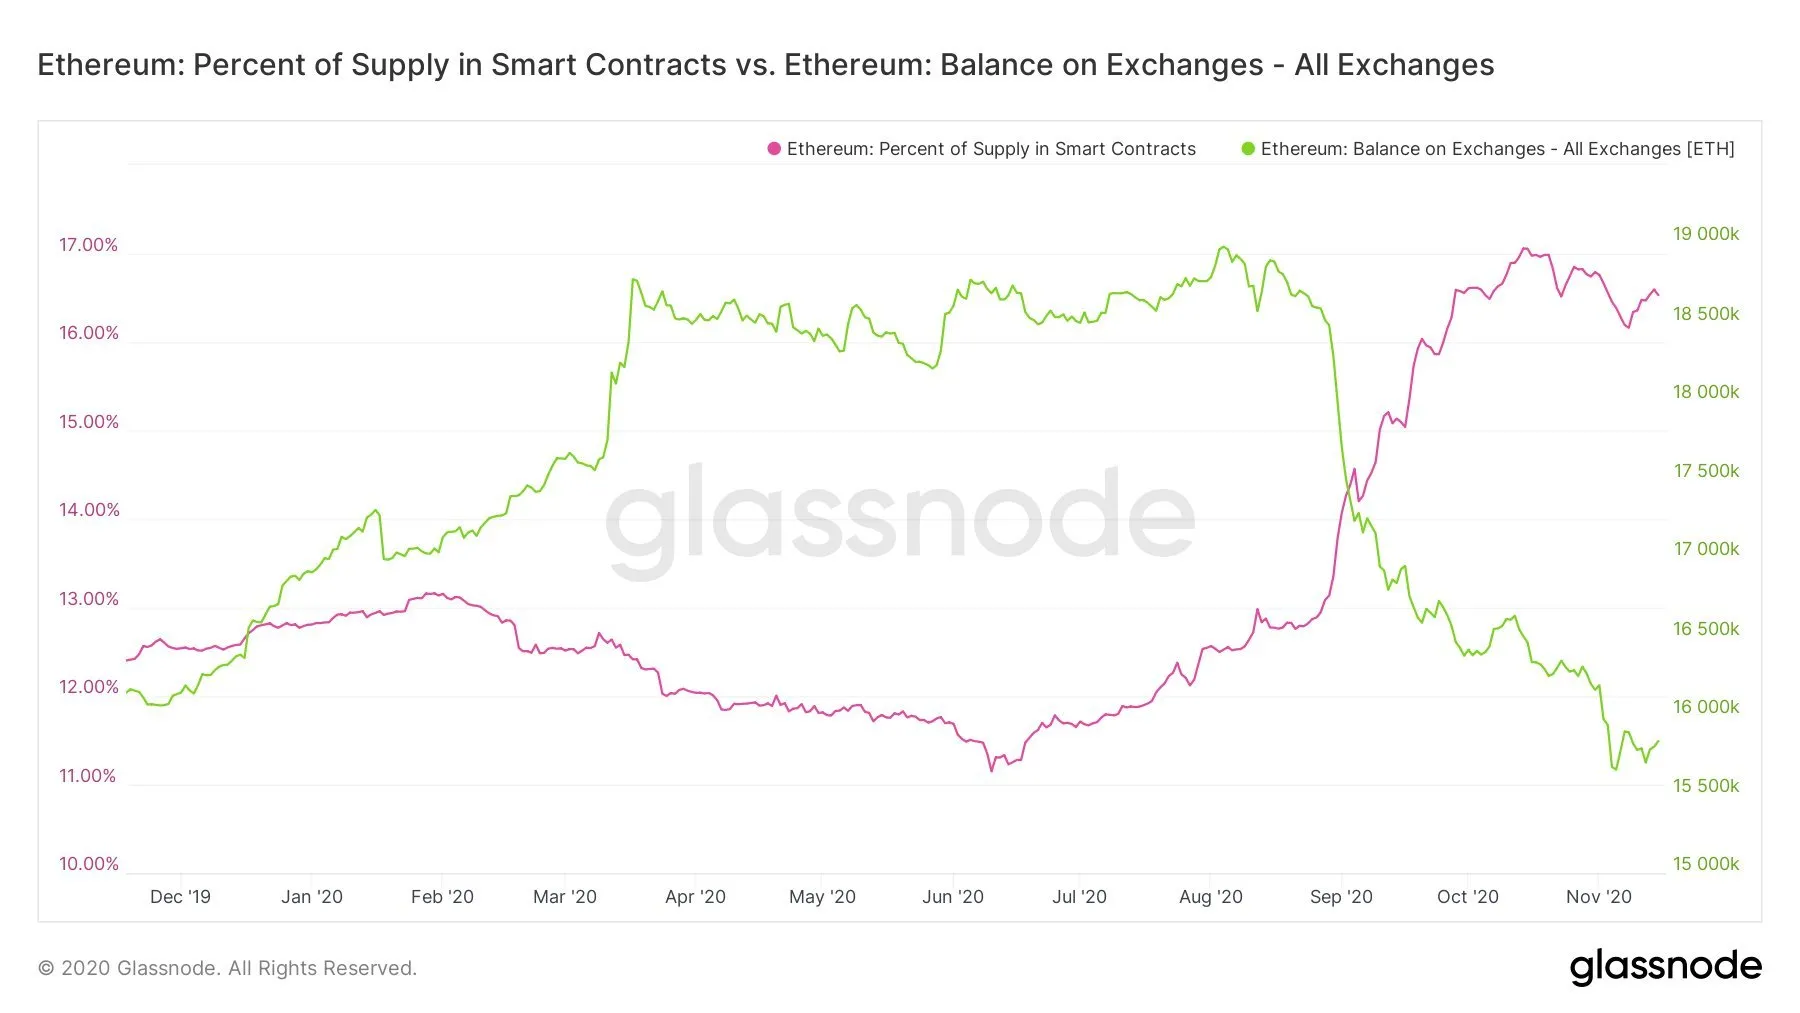 ETH in exchanges vs ETH in smart contracts. Image: Glassnode, compiled by Anthony Sassano